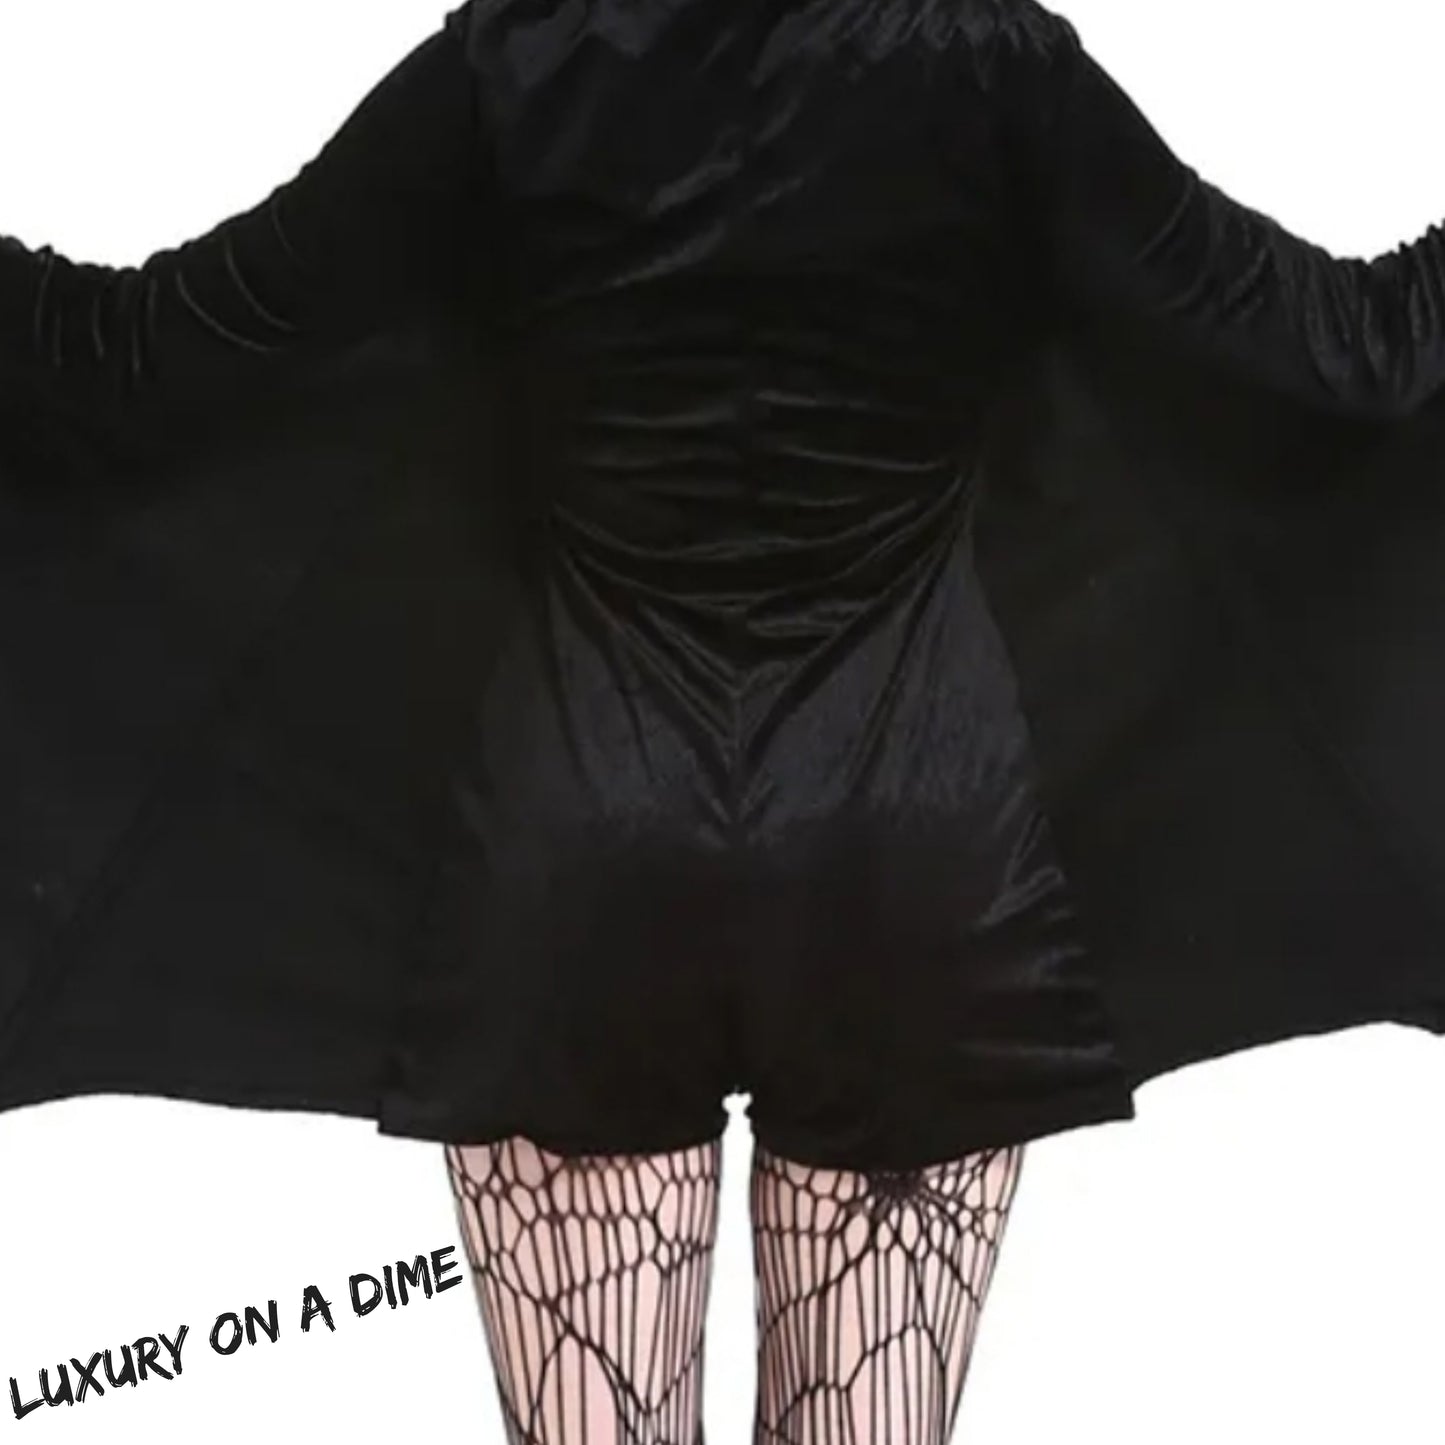 ONE-PIECE Shorts Romper BAT Lady Adult Sexy Women's Halloween Costume Cosplay